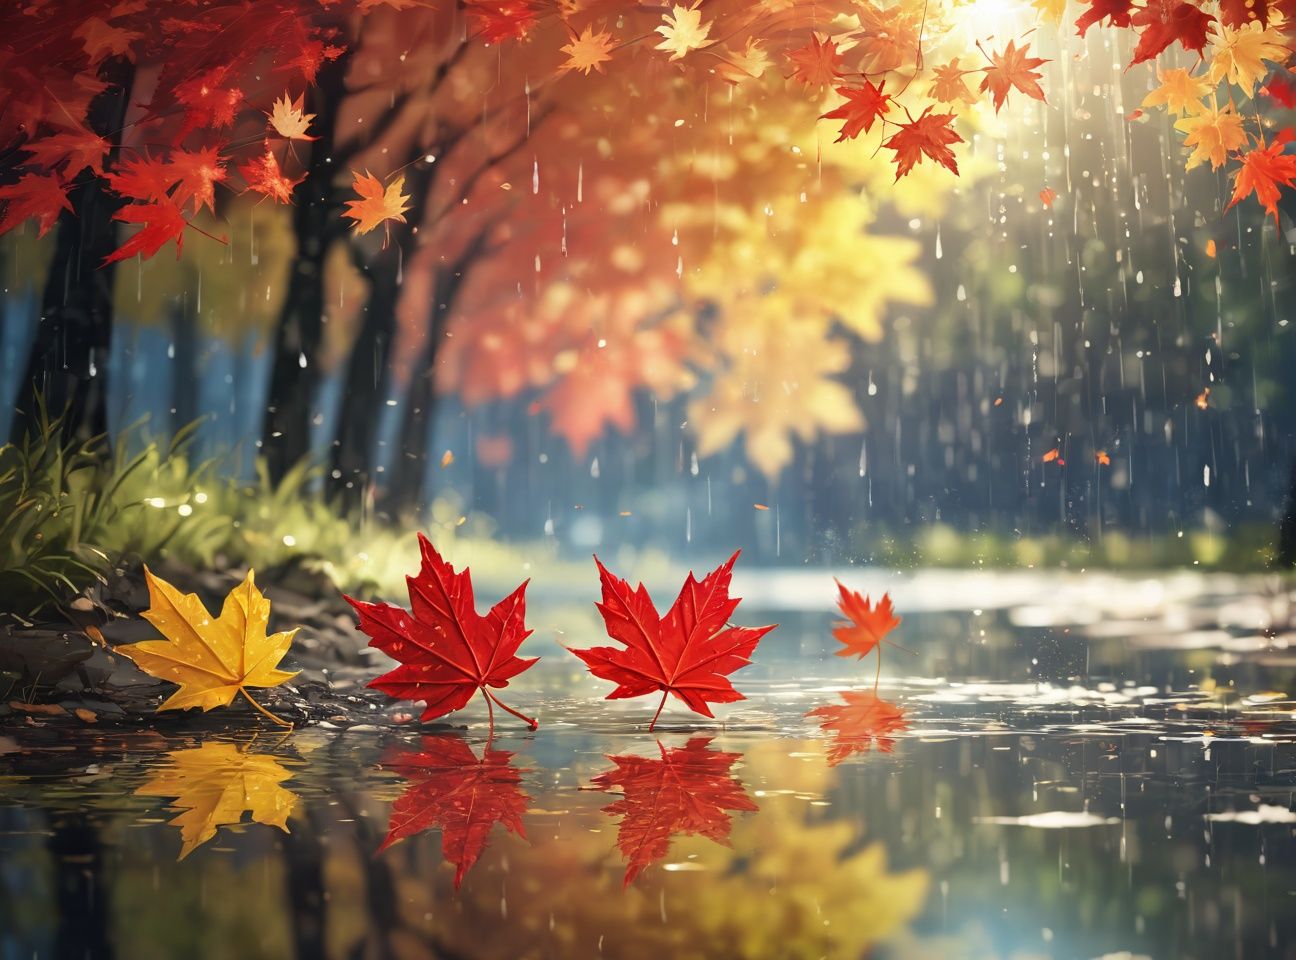 masterpiece,best quality,rain style,sunlight,light,puddle,beautiful lighting,blowing,reflection,autumn leaves,maple leaf,red particles,depth of field,forest,